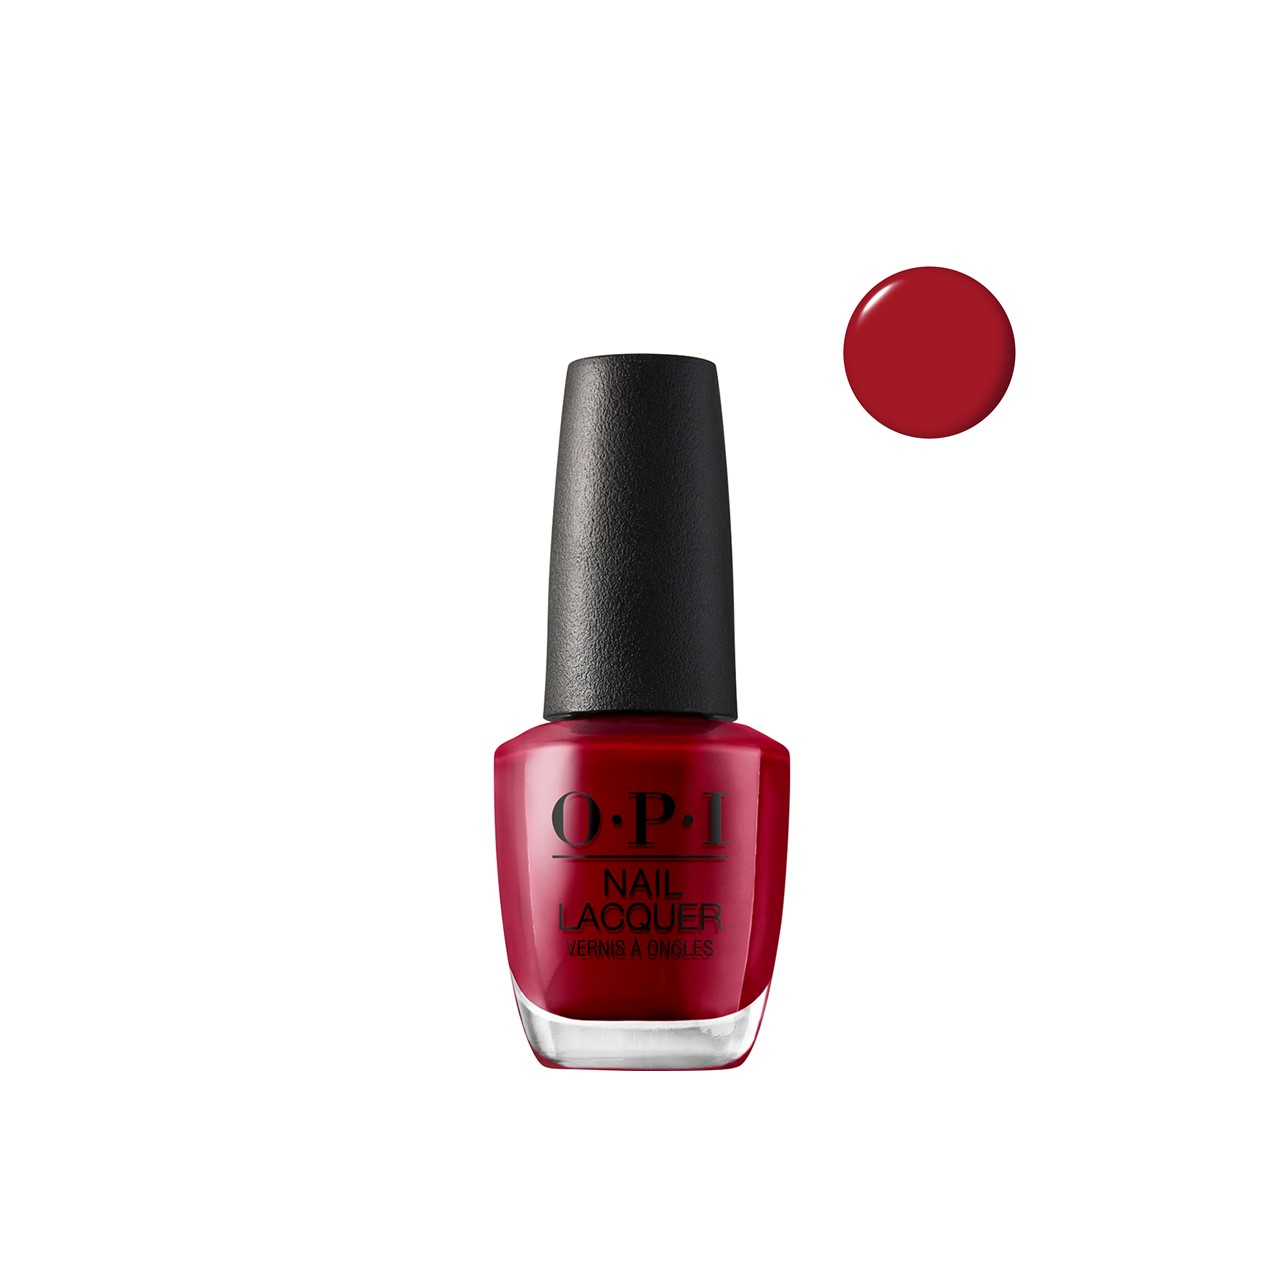 OPI Nail Lacquer Amore at the Grand Canal 15ml (0.51fl oz)